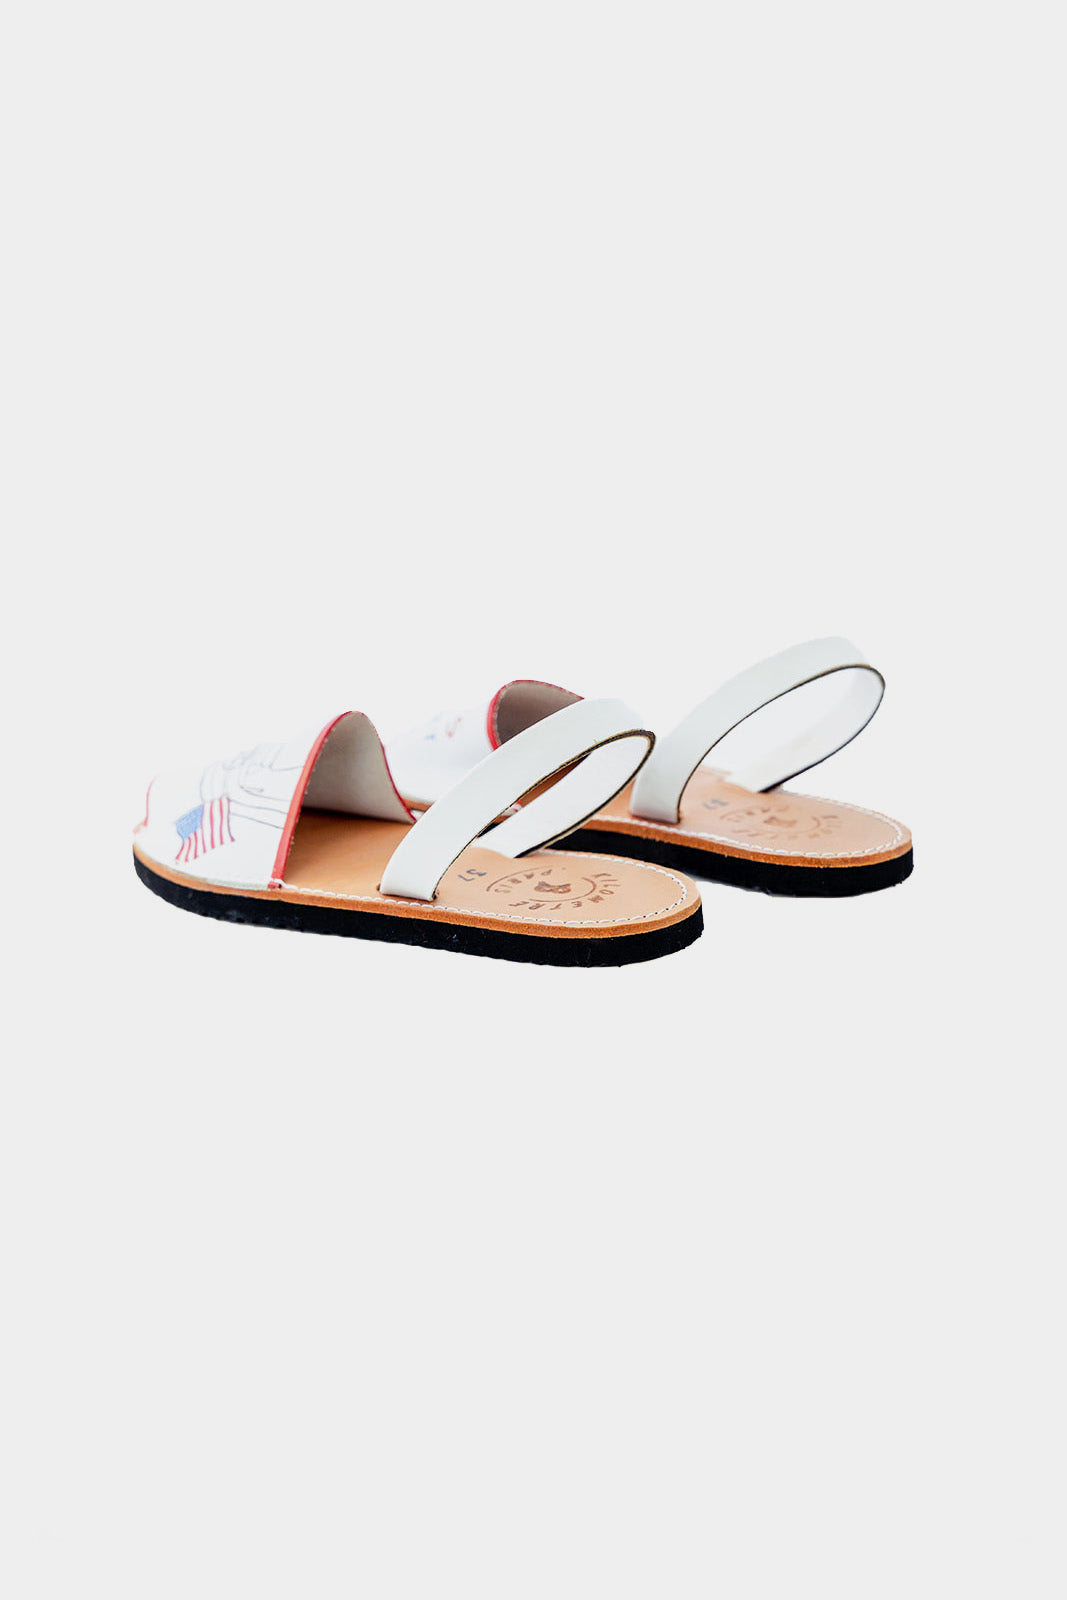 A'maree's Exclusive Leather Sandal